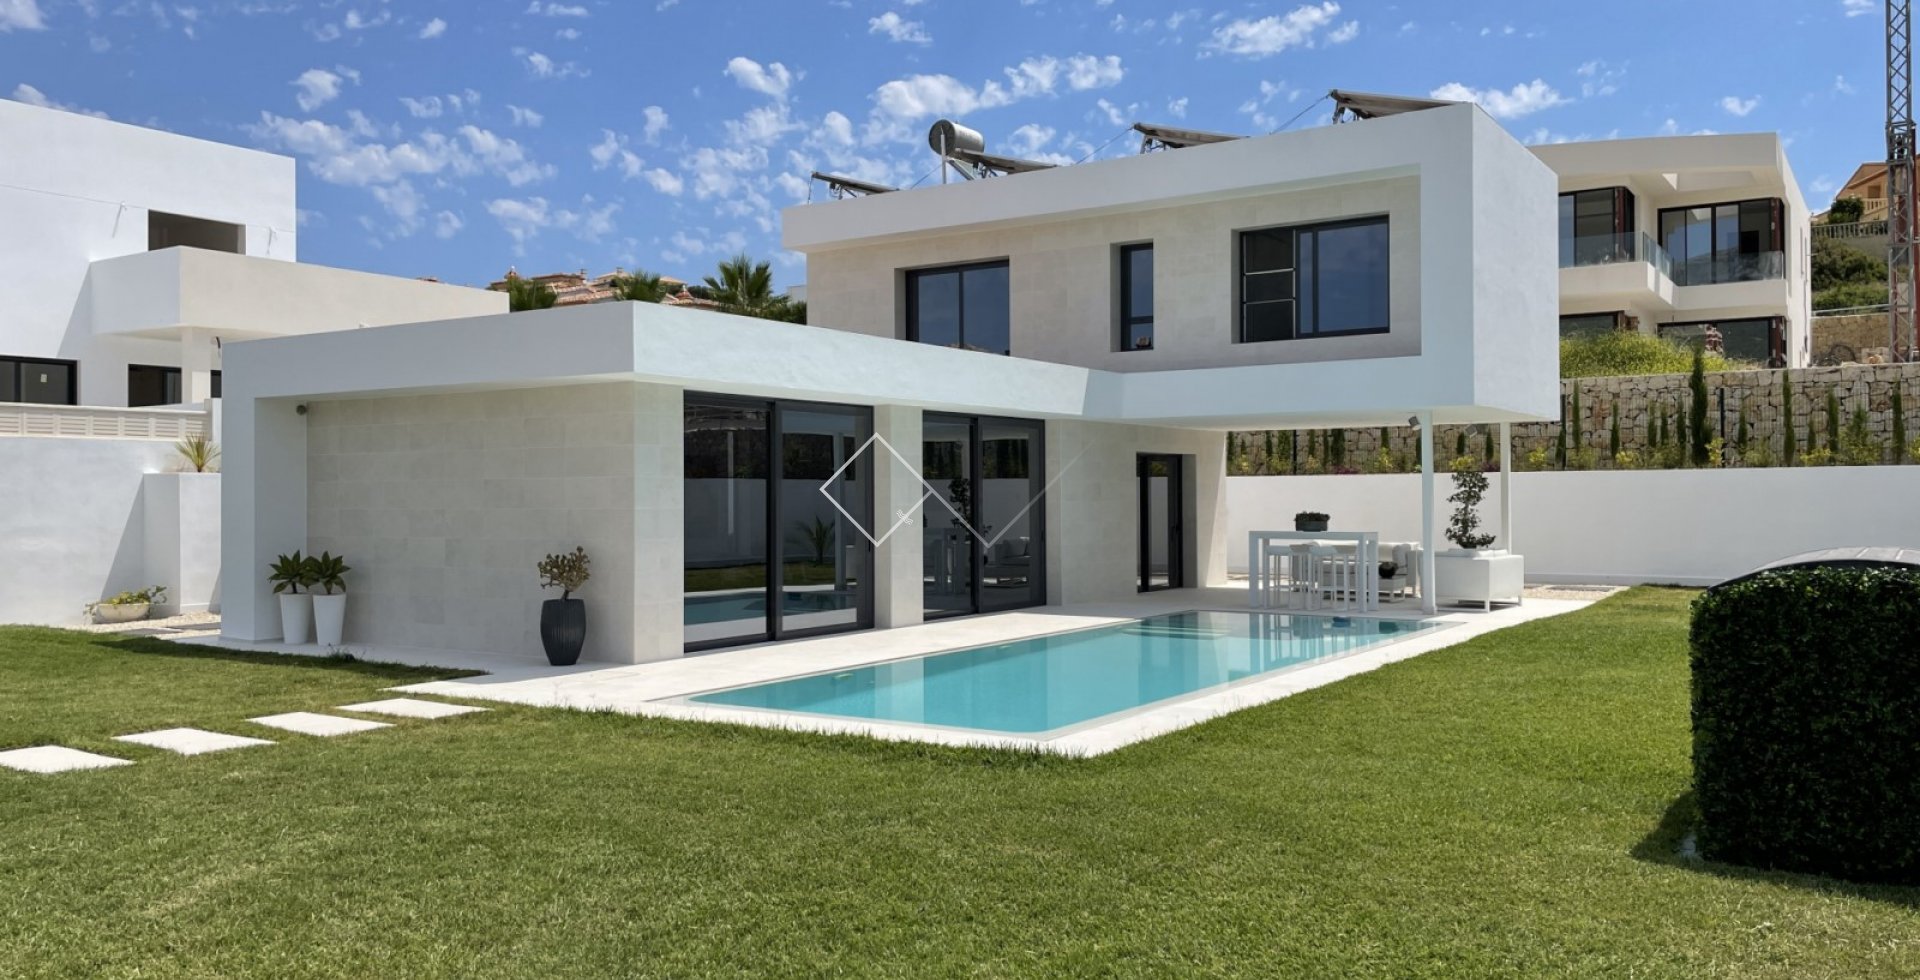 Modern villa for sale close to beach and centre of Calpe